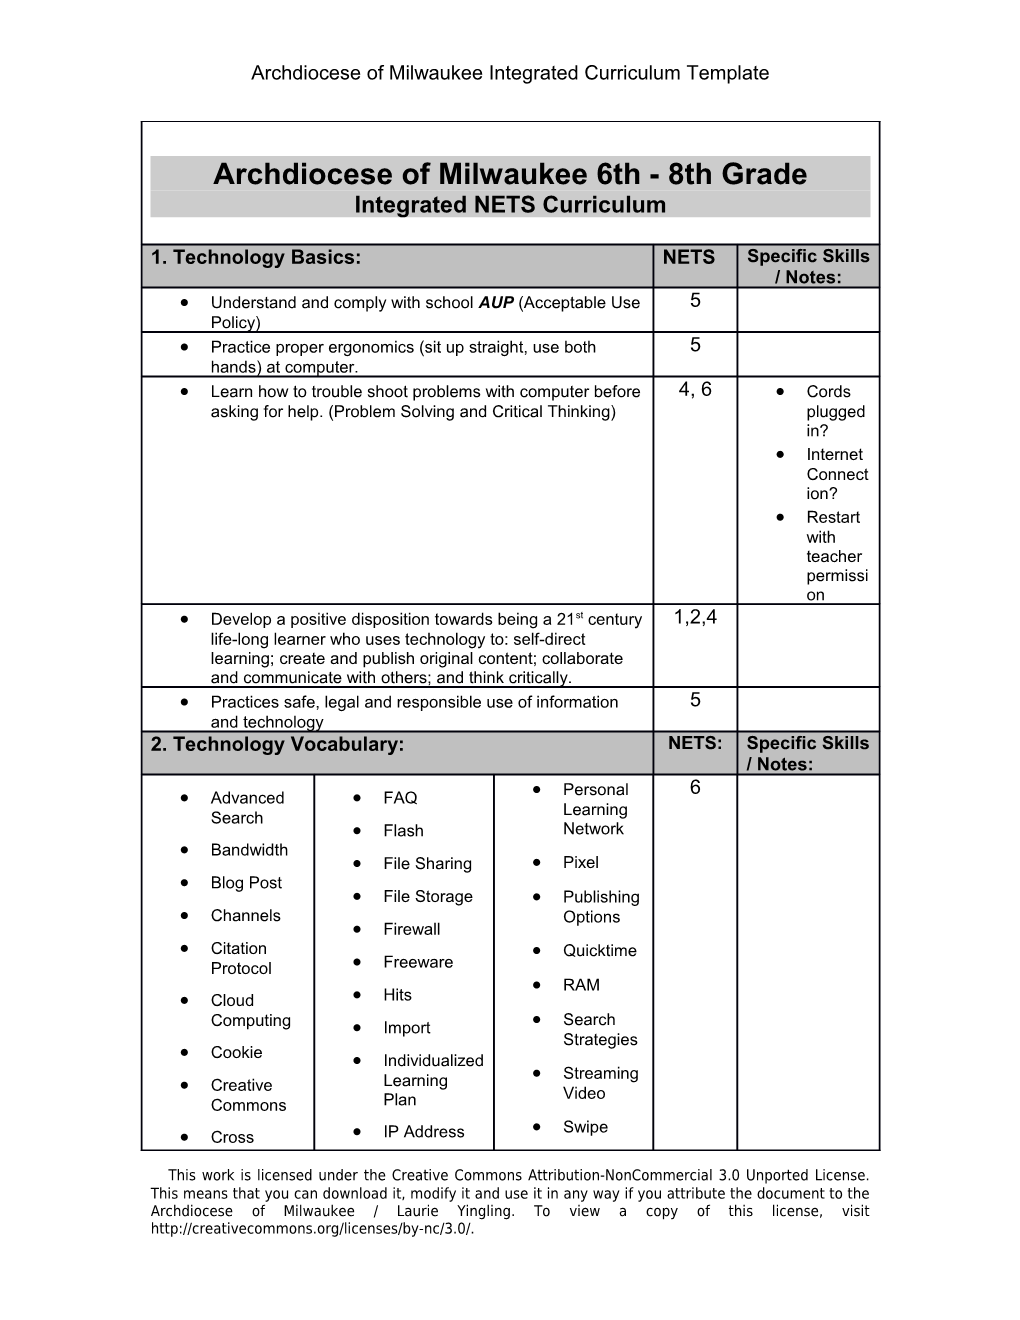 Archdiocese of Milwaukee Integrated Curriculum Template